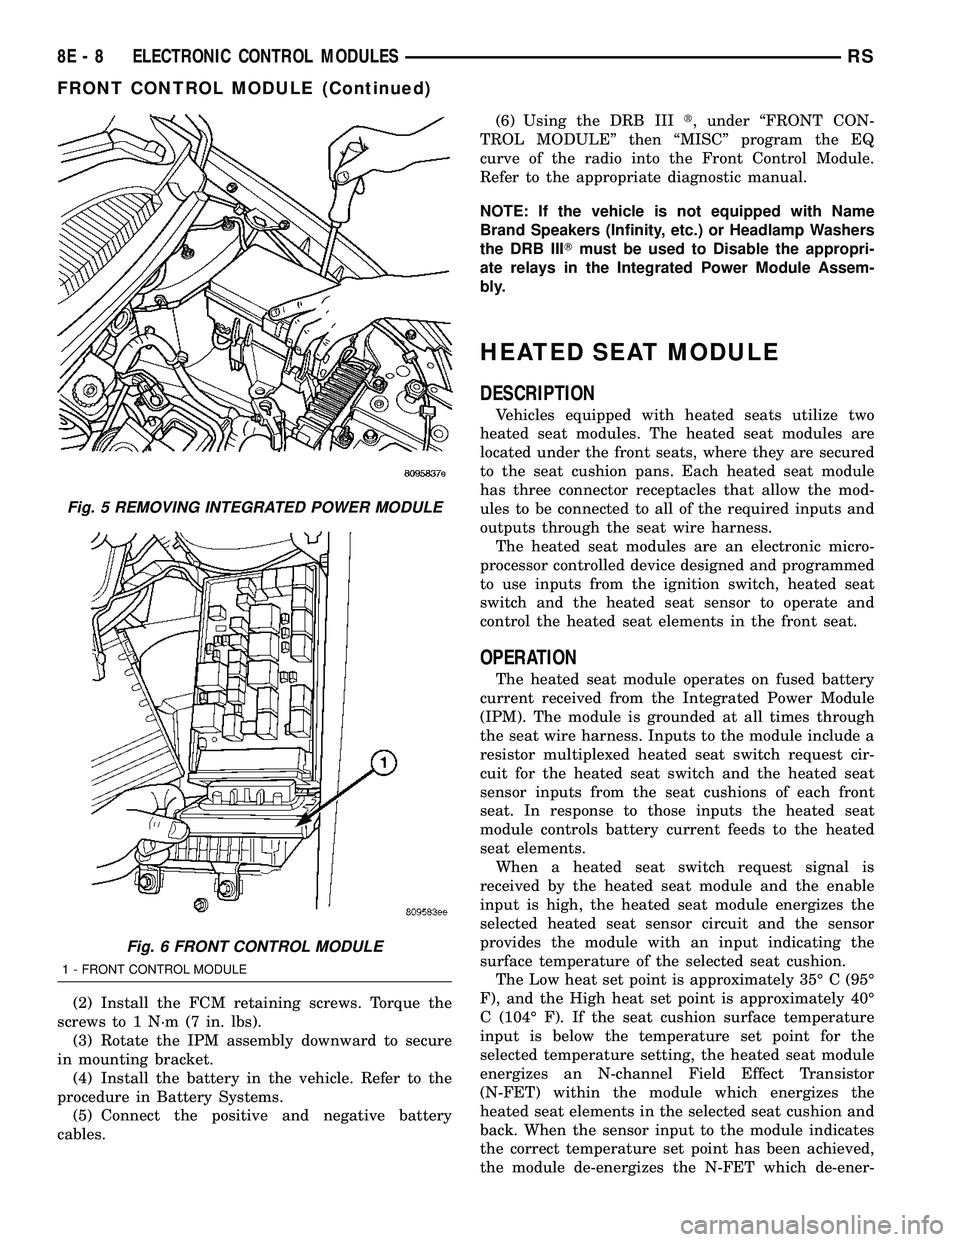 CHRYSLER VOYAGER 2005  Service Manual (2) Install the FCM retaining screws. Torque the
screws to 1 N´m (7 in. lbs).
(3) Rotate the IPM assembly downward to secure
in mounting bracket.
(4) Install the battery in the vehicle. Refer to the
